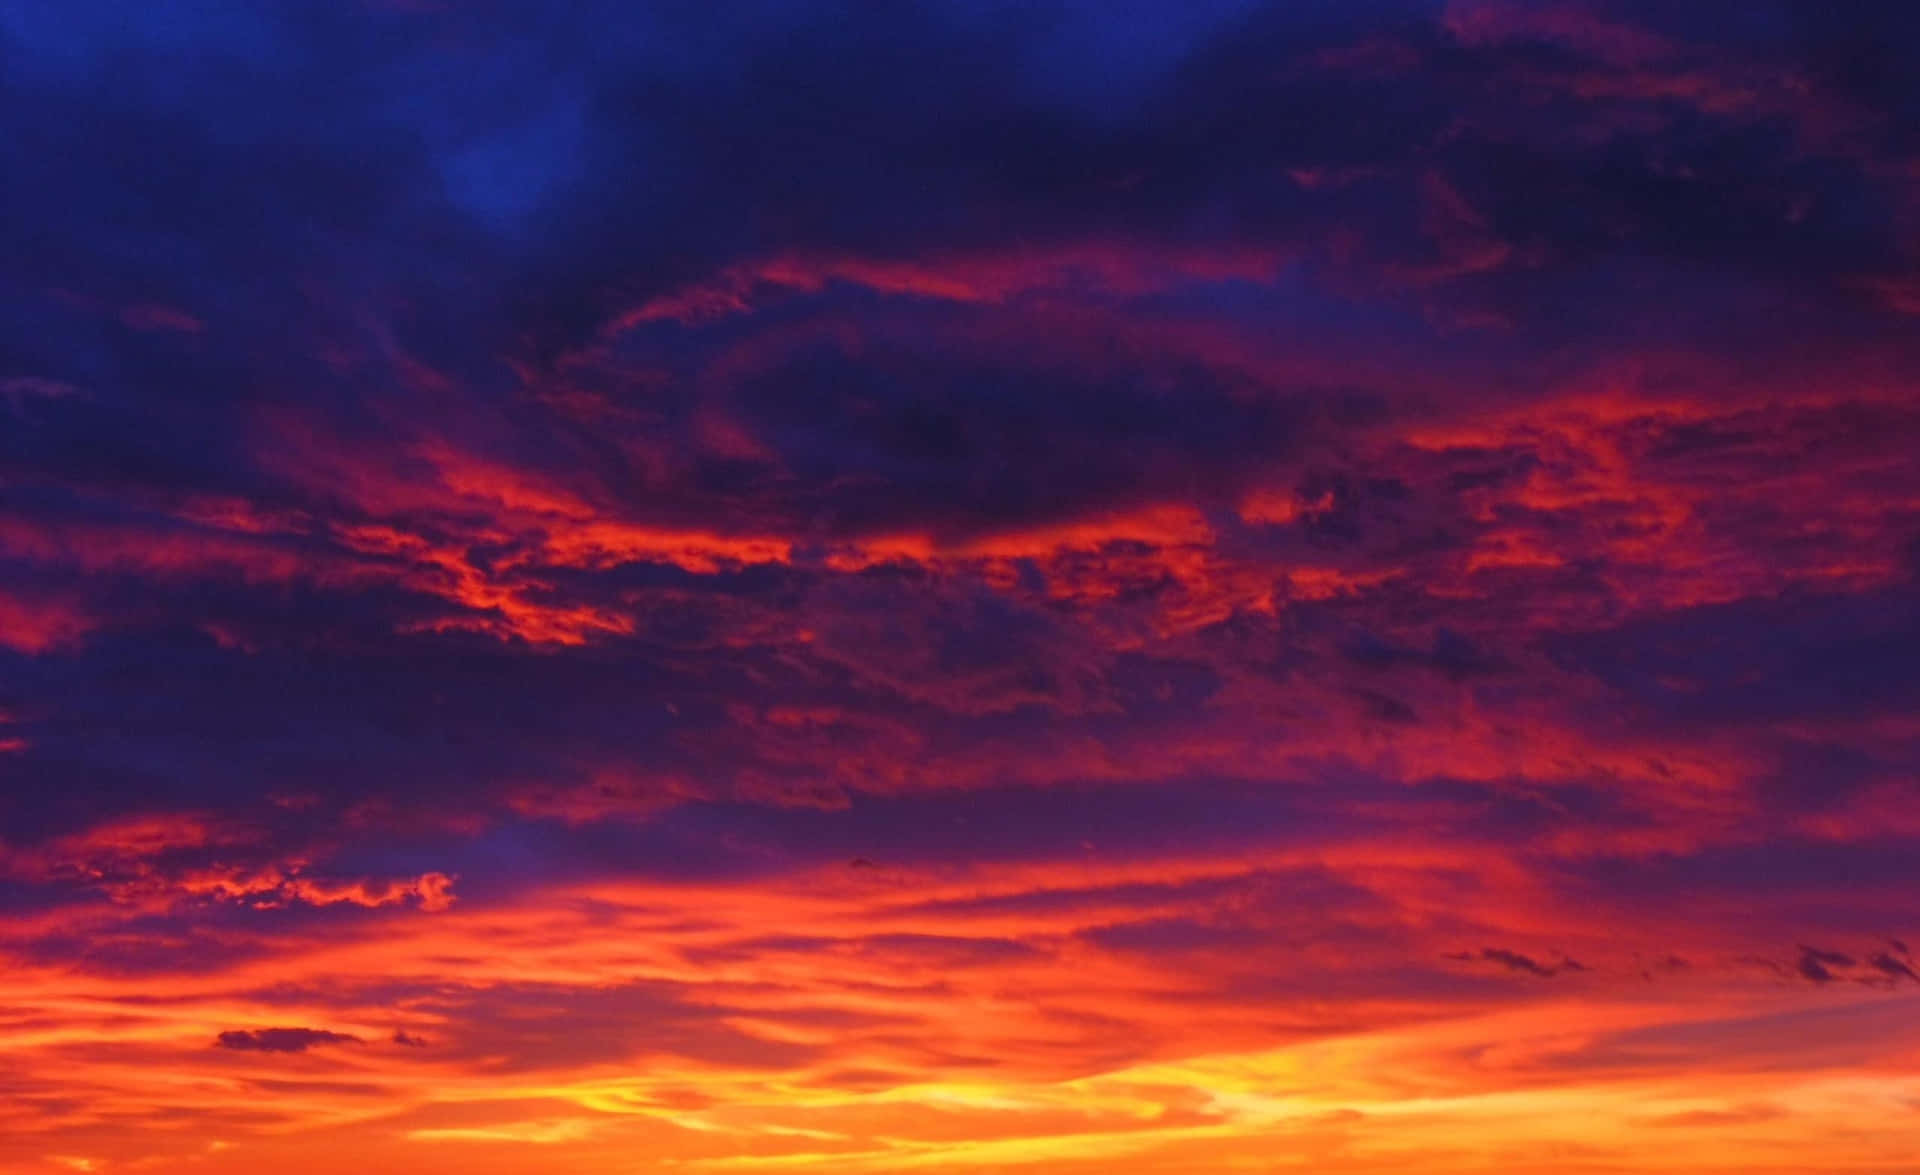 A Colorful Sunset With Clouds In The Sky